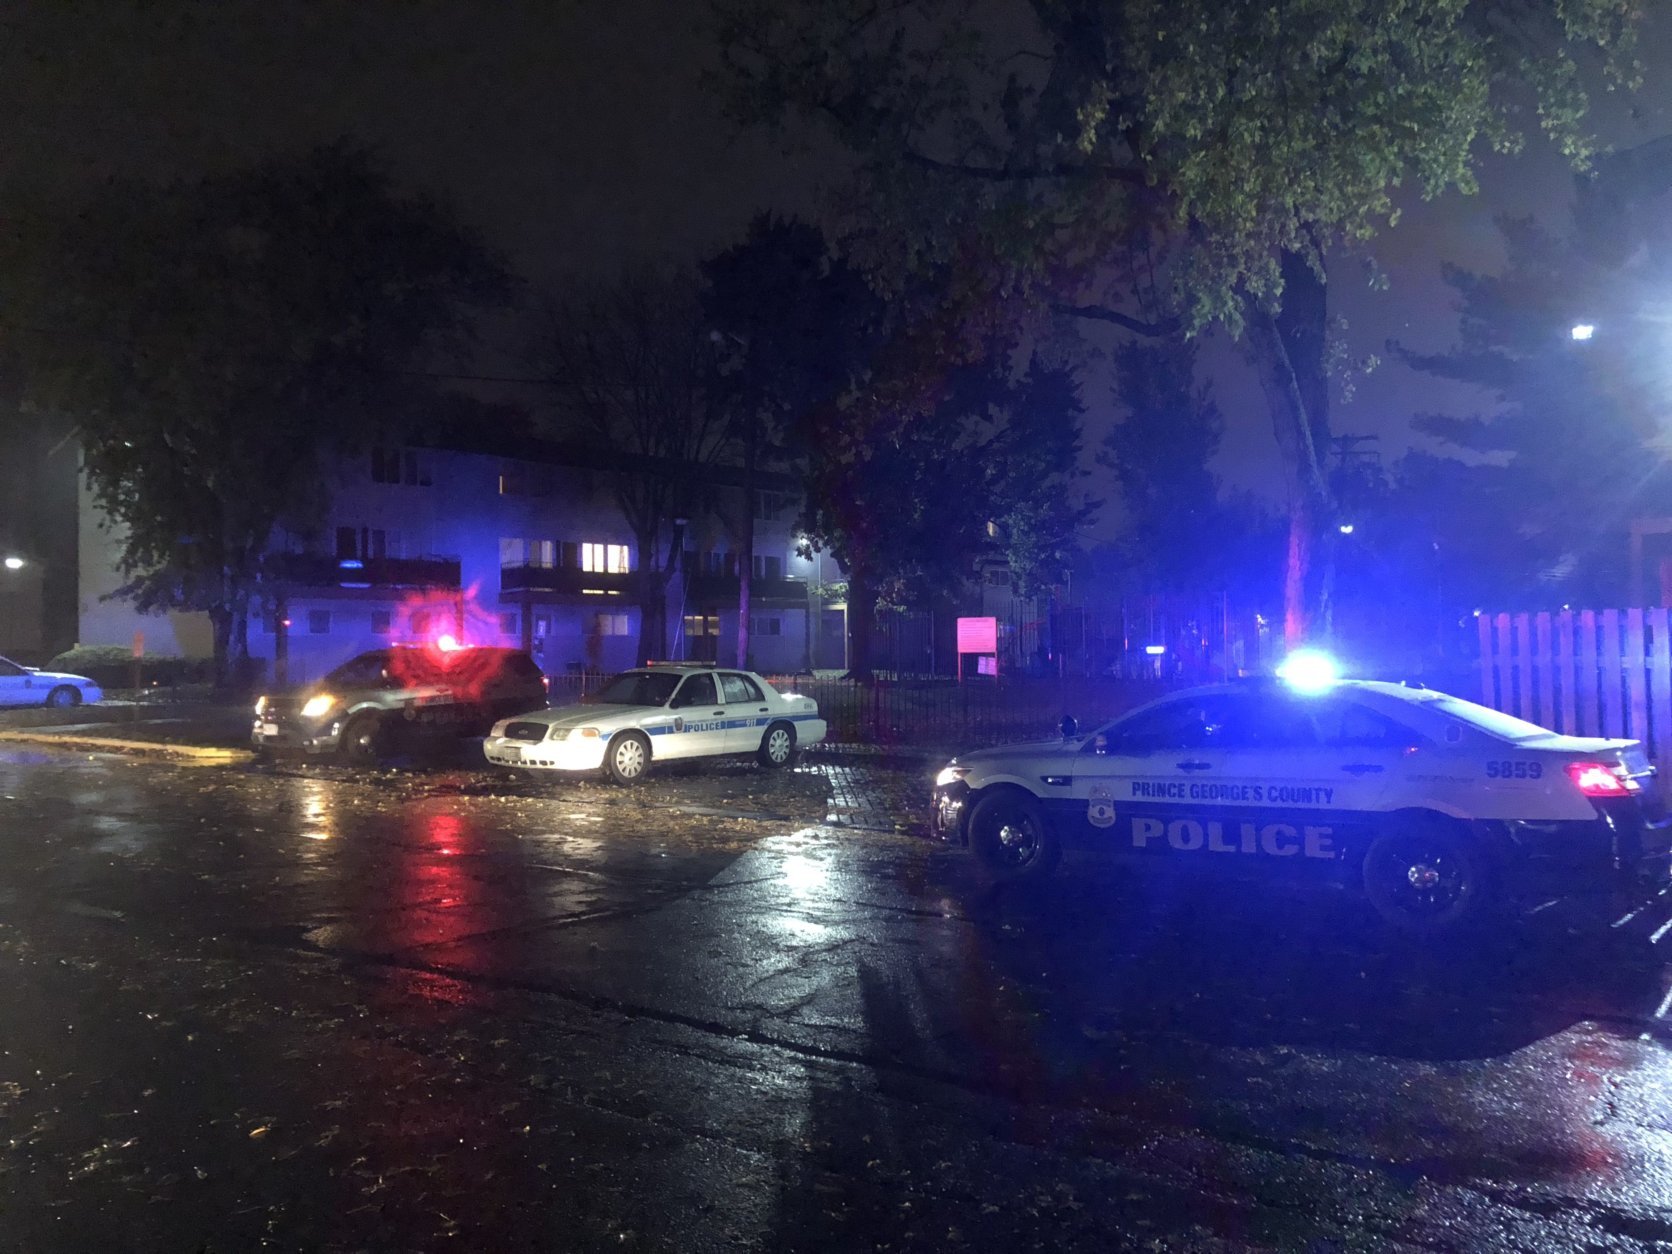 Prince George's County police were still at the scene Monday night, hours after the shooting near an apartment complex. (WTOP/Mike Murillo)